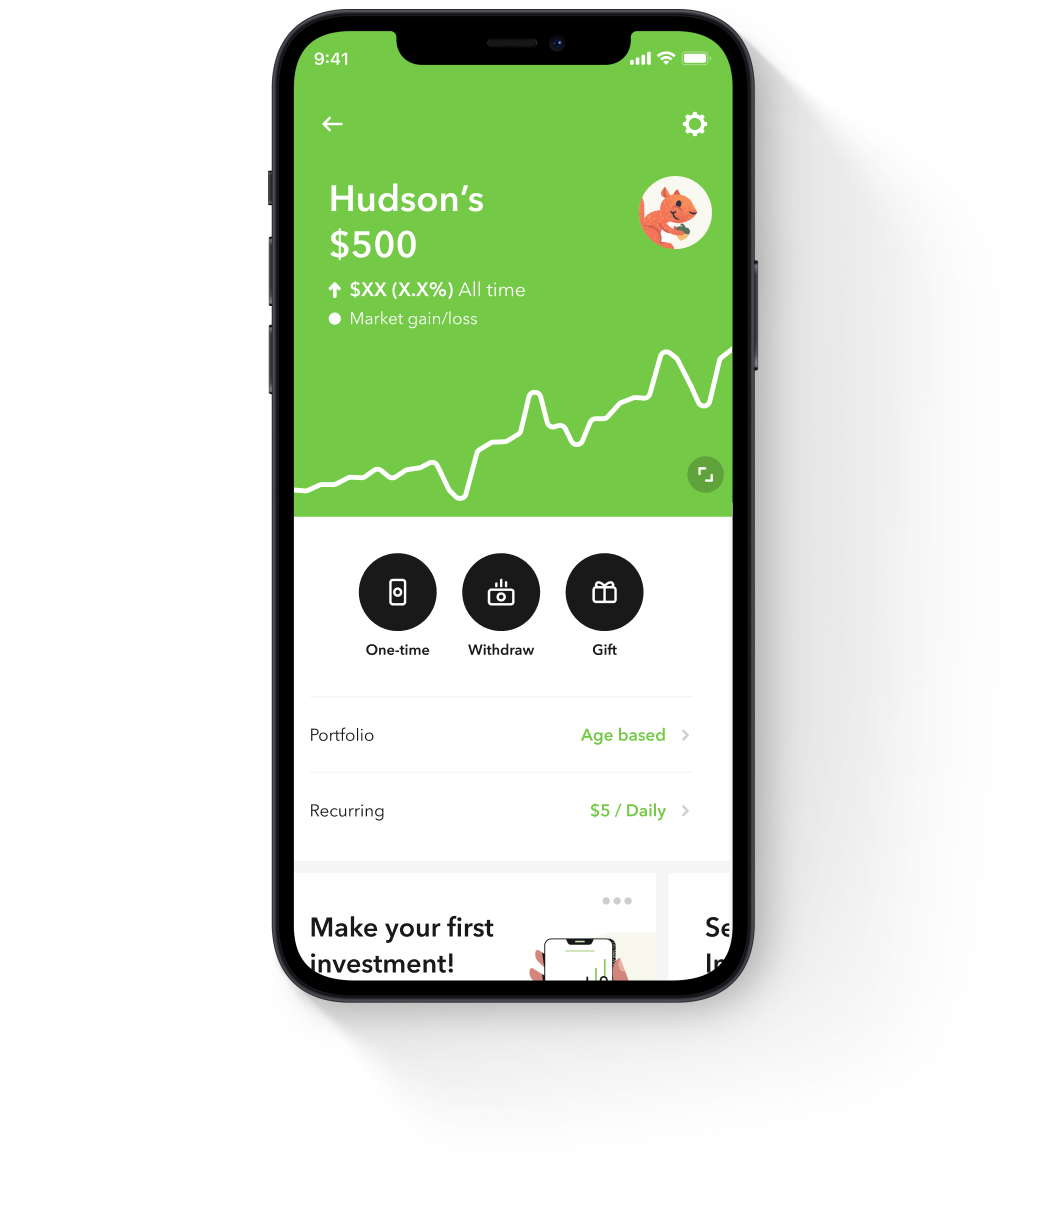 start investing with acorns for sale